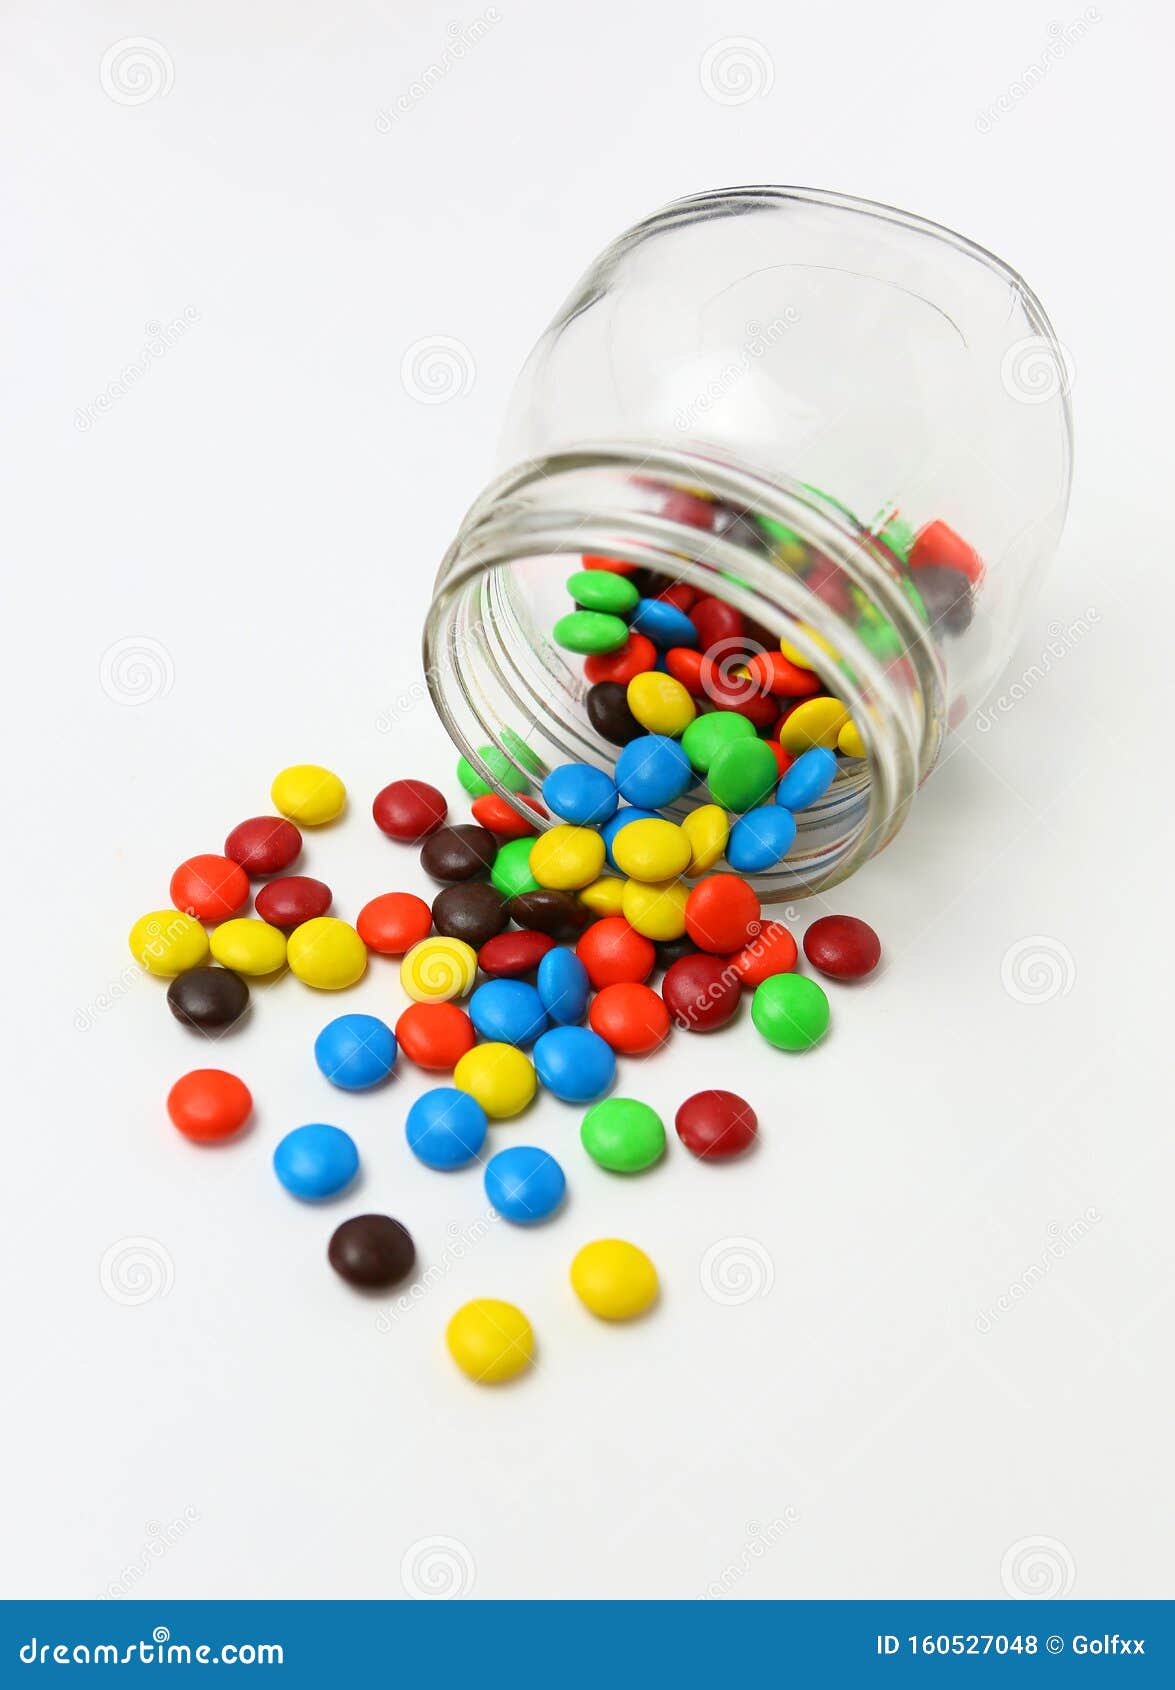 Colorful Sugar-coated Chocolate Smarties in a Glass Jar Flowing Out on ...